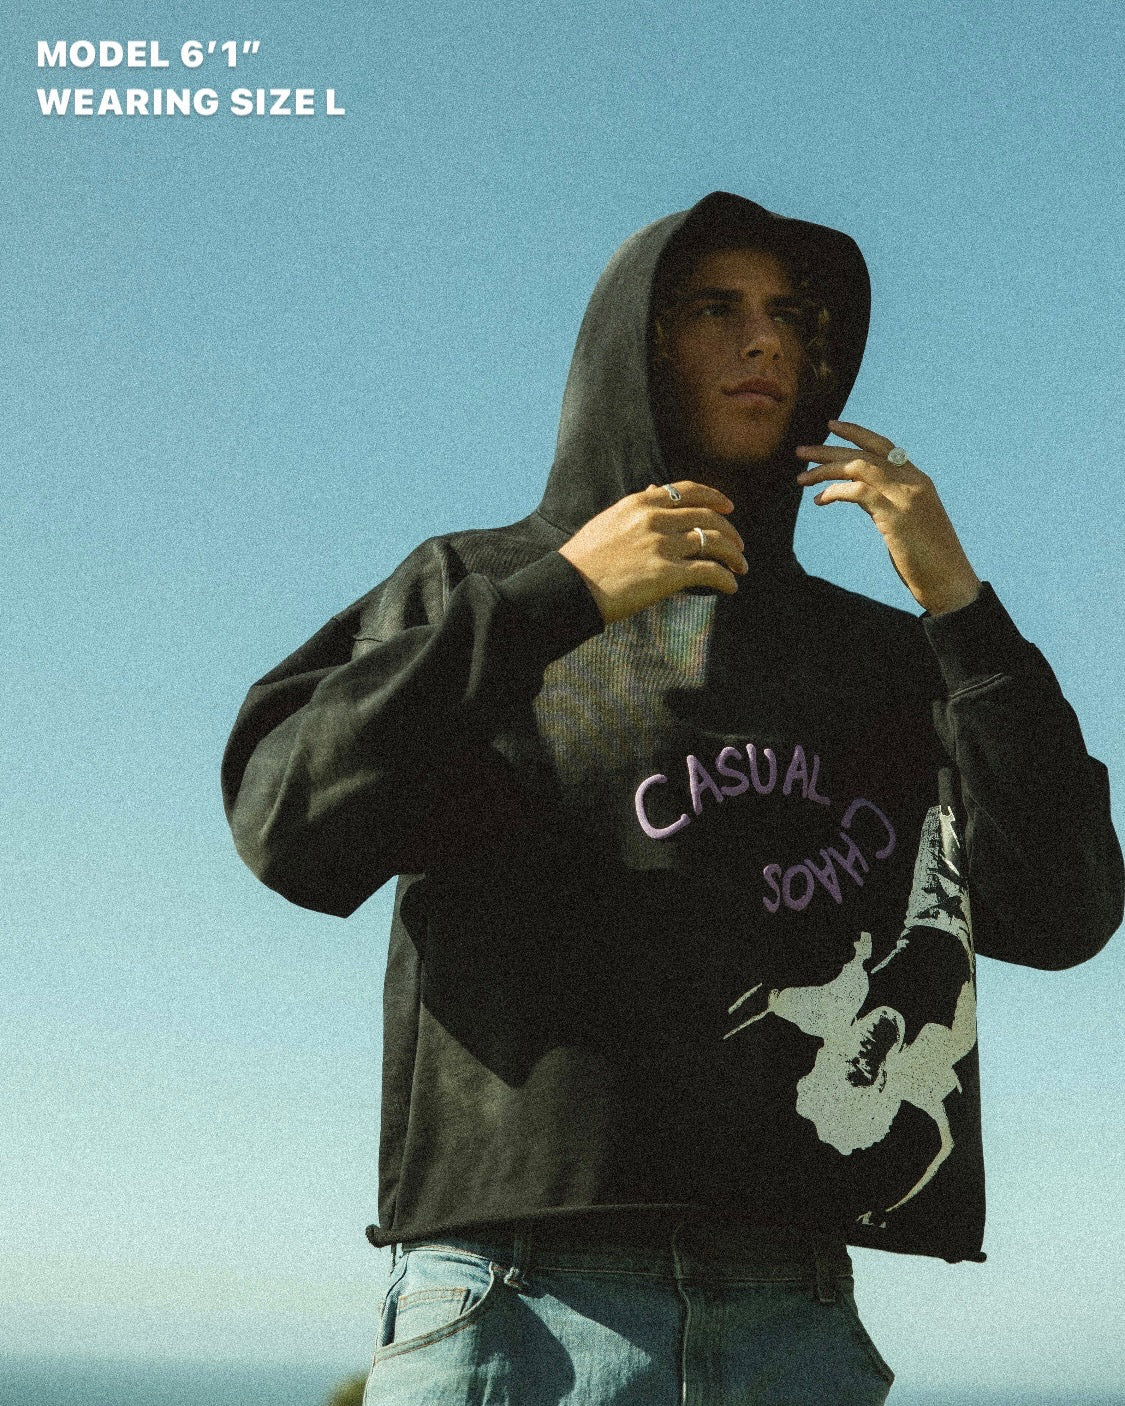 COOL WITH CHAOS CROPPED HOODIE